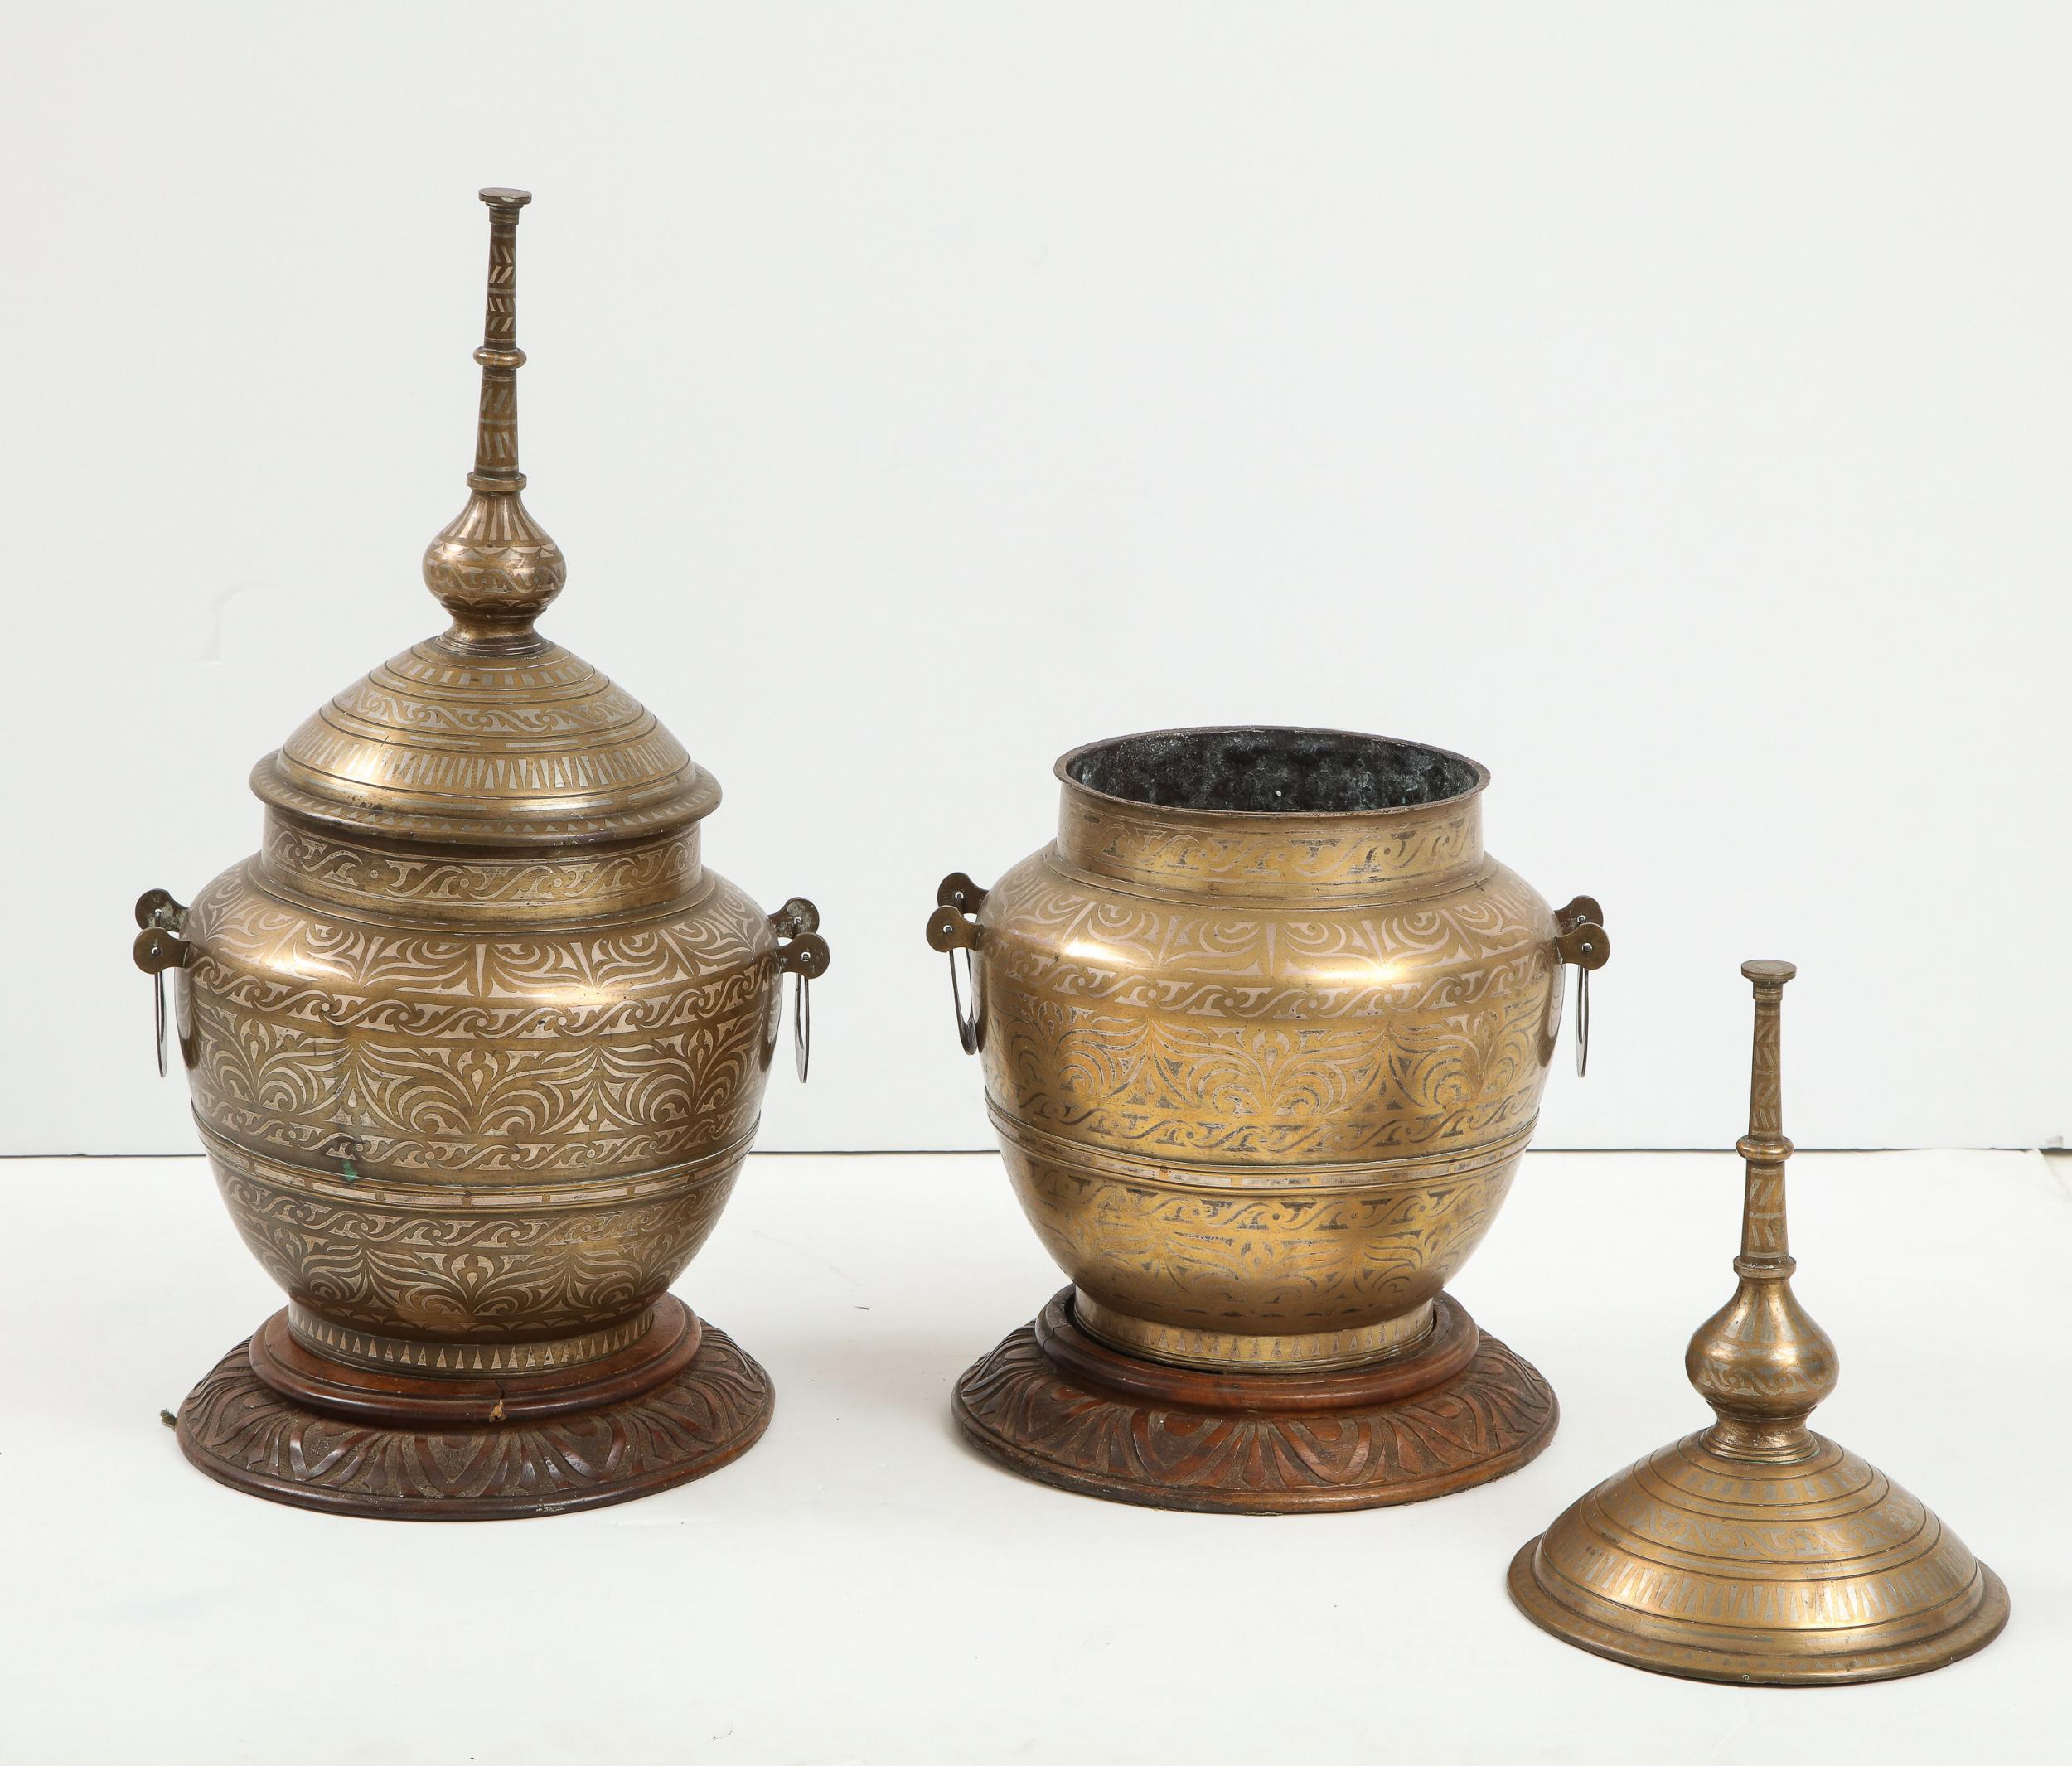 Attractive pair of mixed metal lidded jars, probably Indo-Persian 19th century, on carved wooden stands, having tall spire finials over turned bodies having pewter and other metals inlaid in an arabesque pattern.